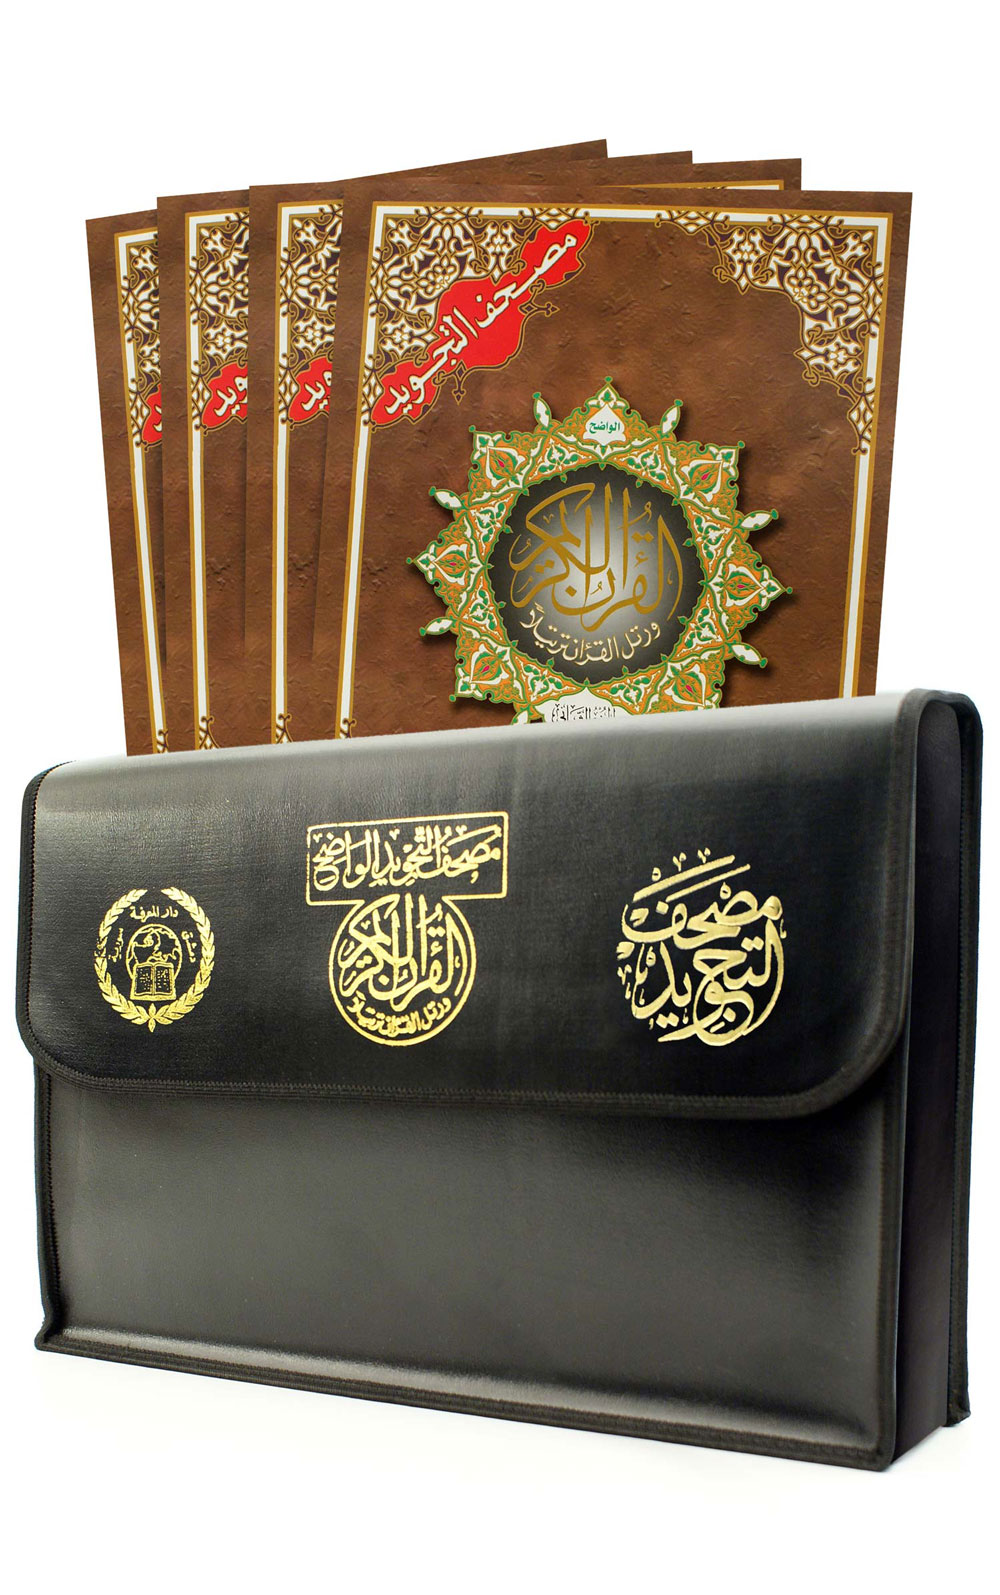 Tajweed Quran in 30 Parts with a Nice Leather Case